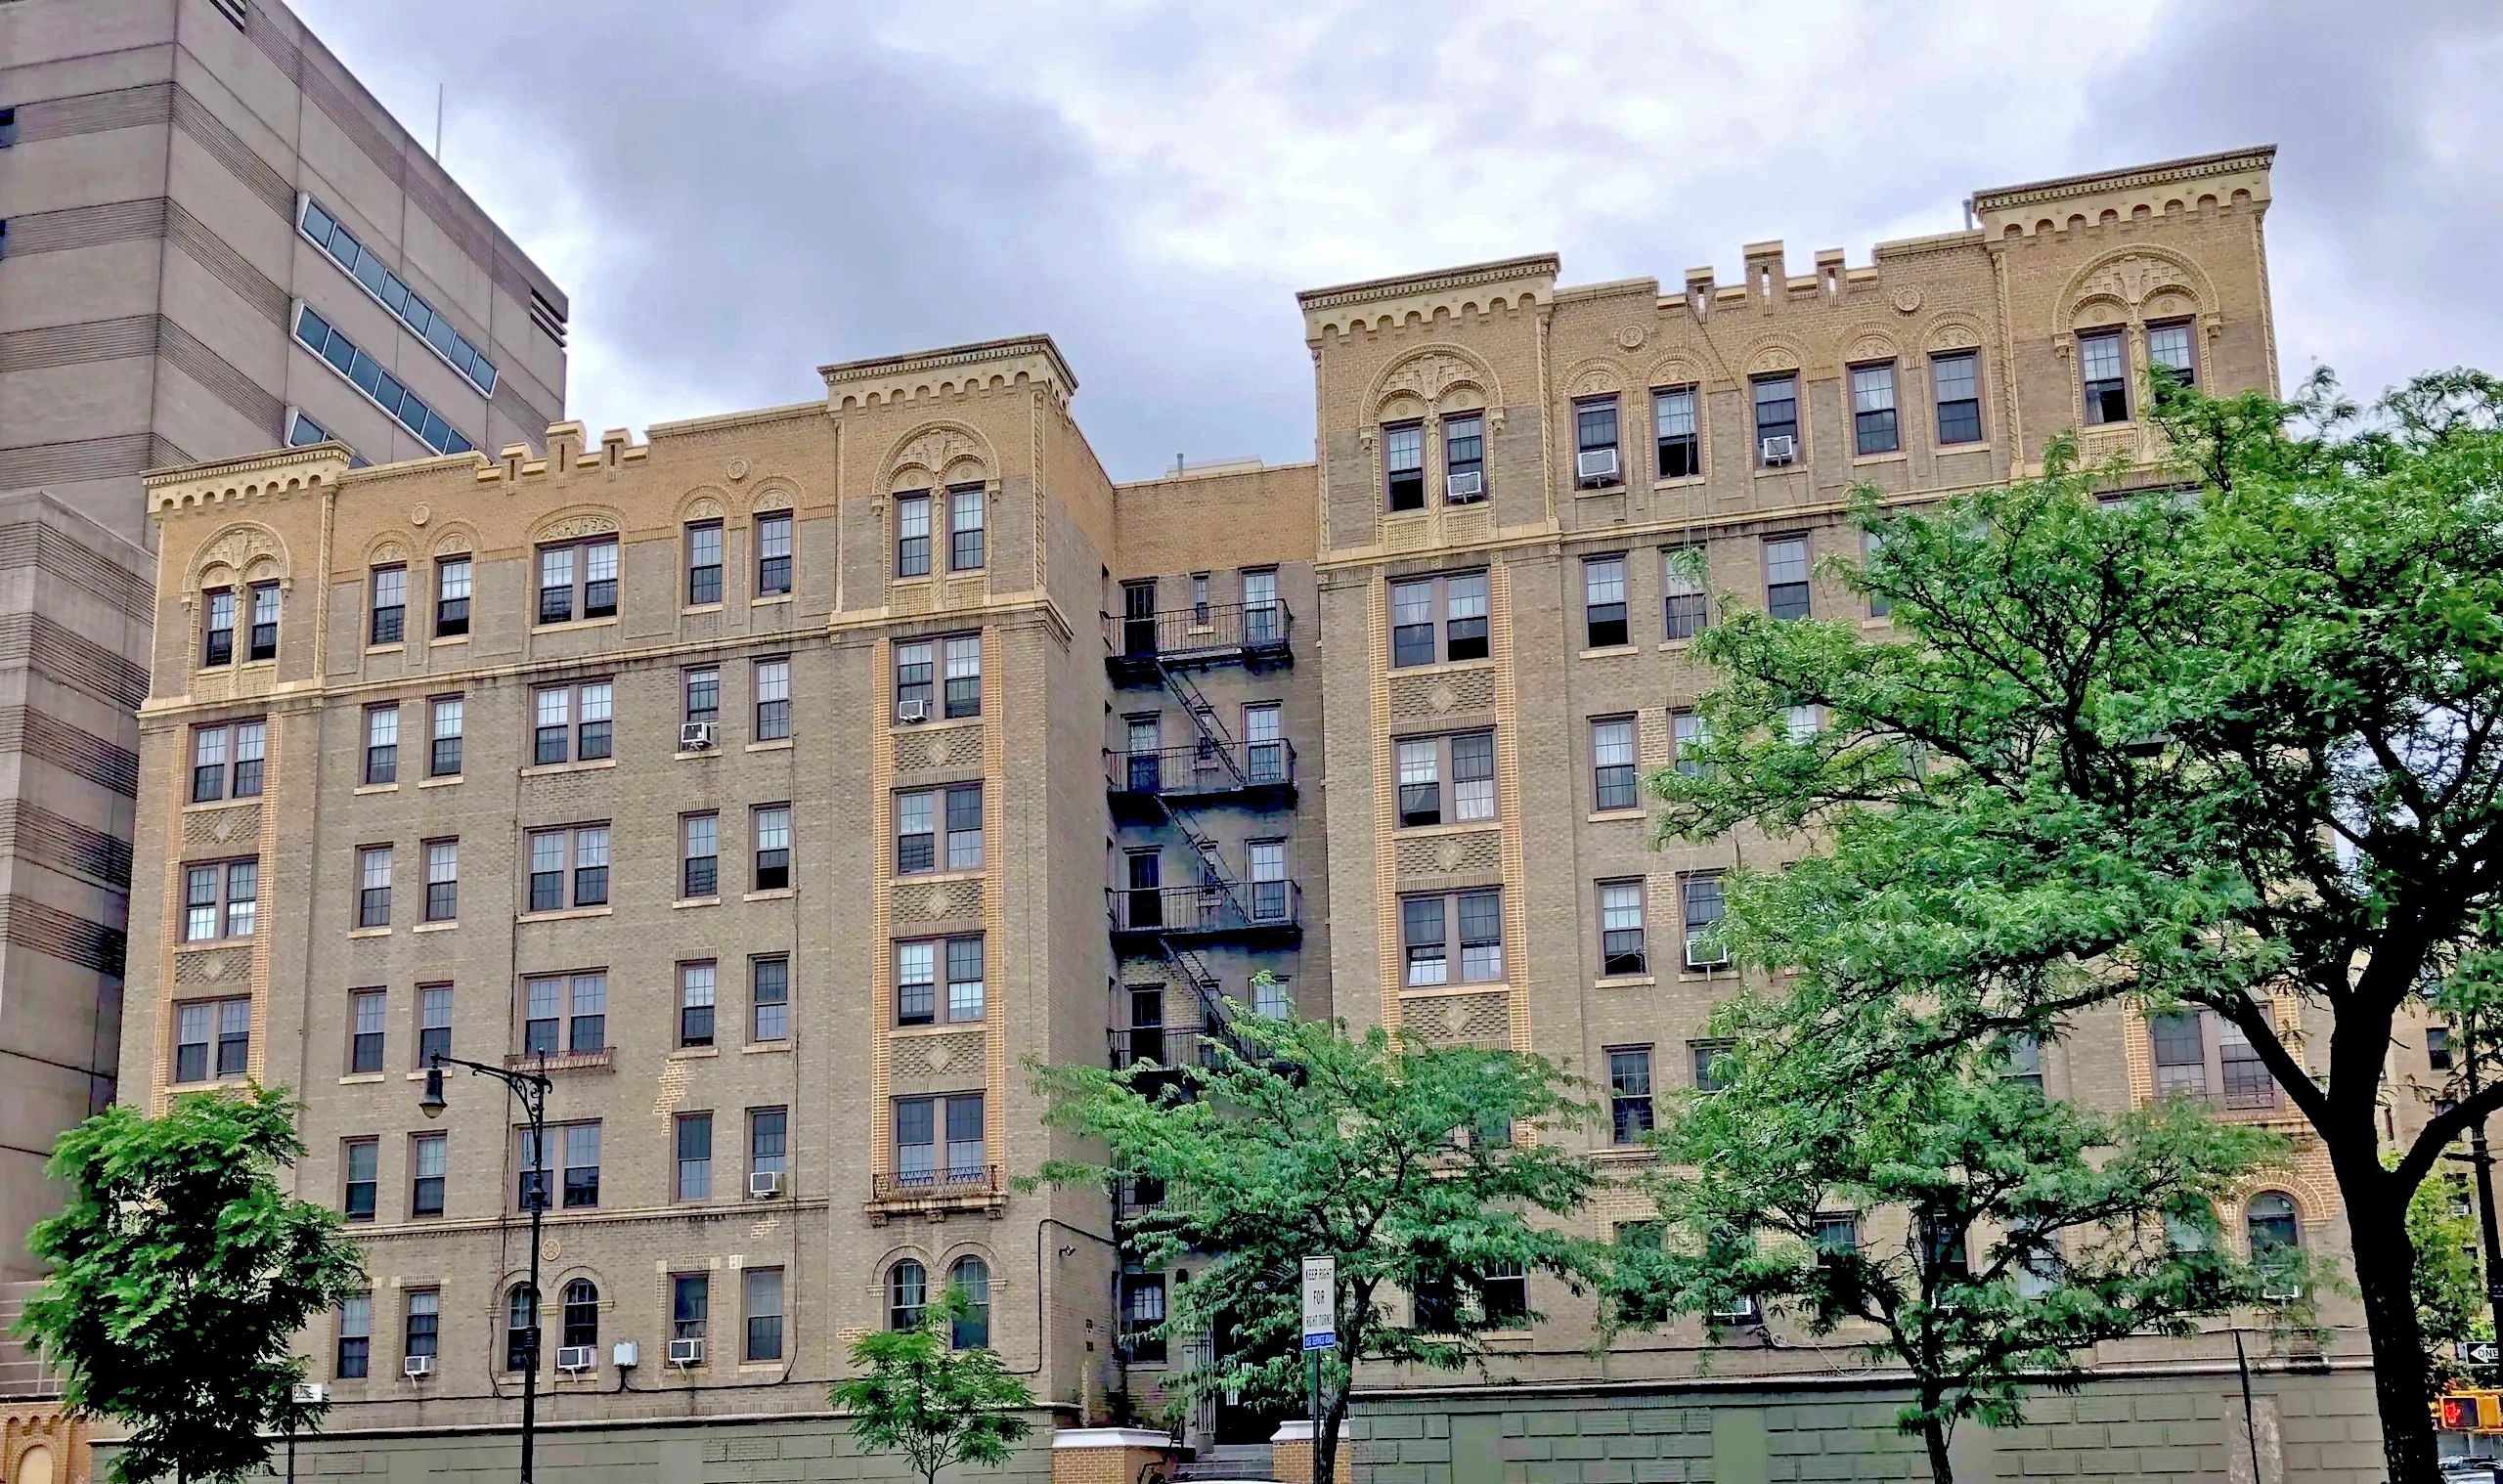 1100 Grand Concourse is a co-operative apartment building located in the Bronx neighborhood NYC.